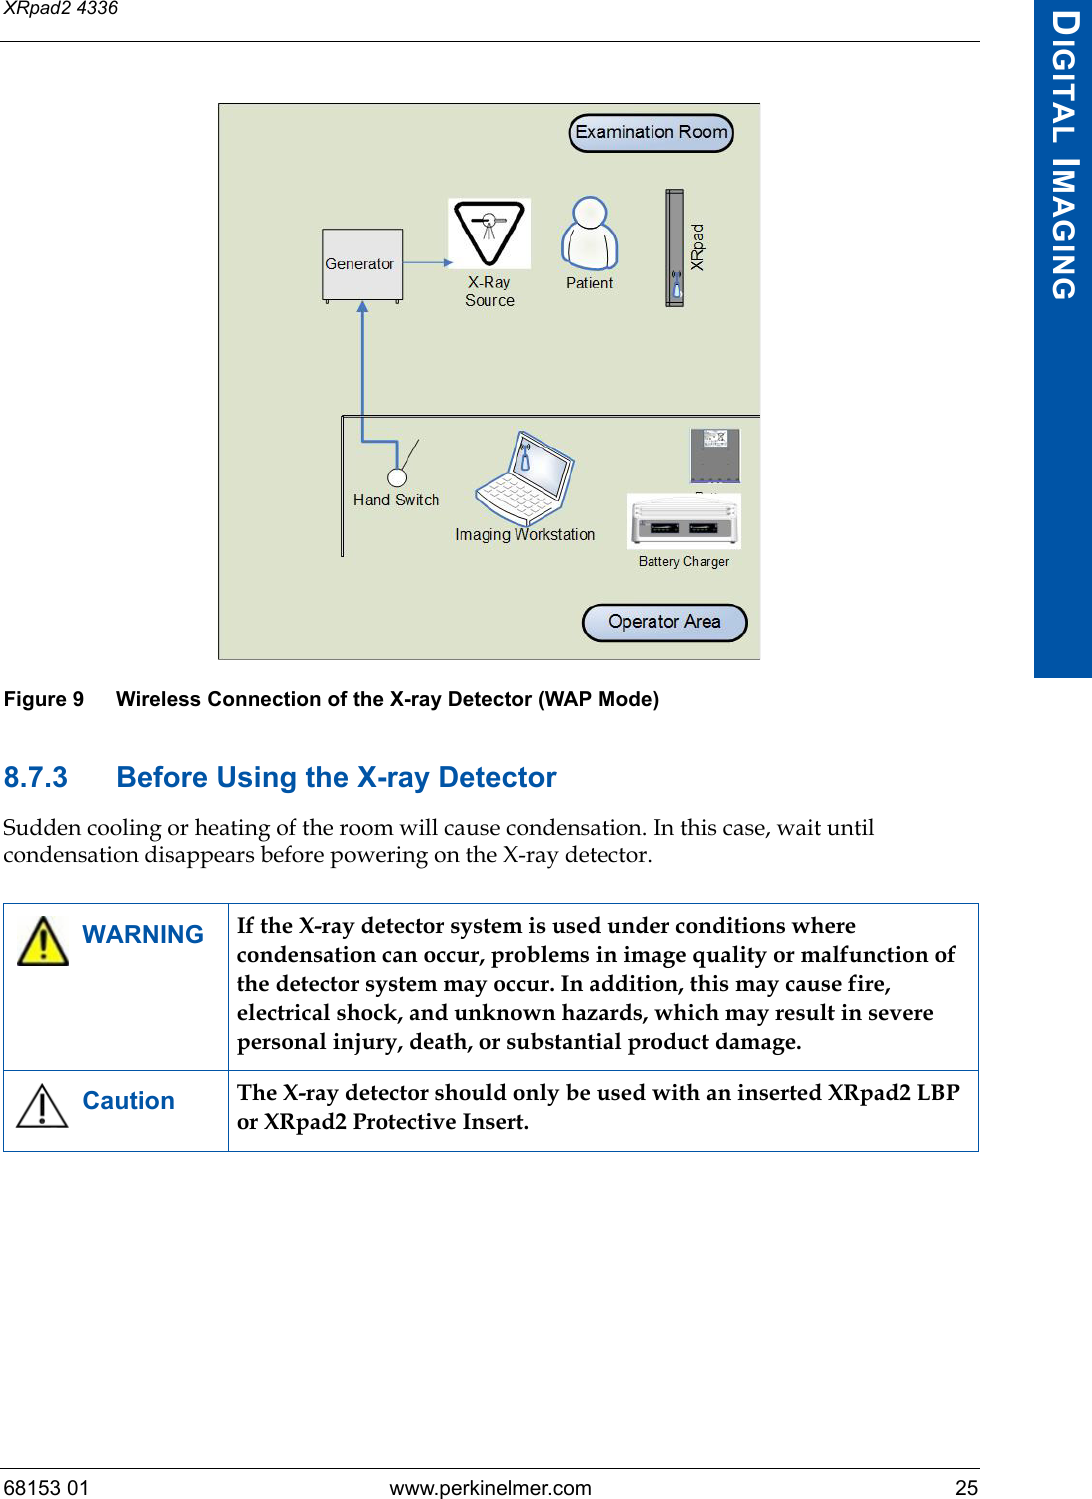 68153 01 www.perkinelmer.com 25XRpad2 4336DIGITAL IMAGINGFigure 9 Wireless Connection of the X-ray Detector (WAP Mode)8.7.3 Before Using the X-ray DetectorSudden cooling or heating of the room will cause condensation. In this case, wait until condensation disappears before powering on the X-ray detector.WARNING If the X-ray detector system is used under conditions where condensation can occur, problems in image quality or malfunction of the detector system may occur. In addition, this may cause fire, electrical shock, and unknown hazards, which may result in severe personal injury, death, or substantial product damage.Caution The X-ray detector should only be used with an inserted XRpad2 LBP or XRpad2 Protective Insert.